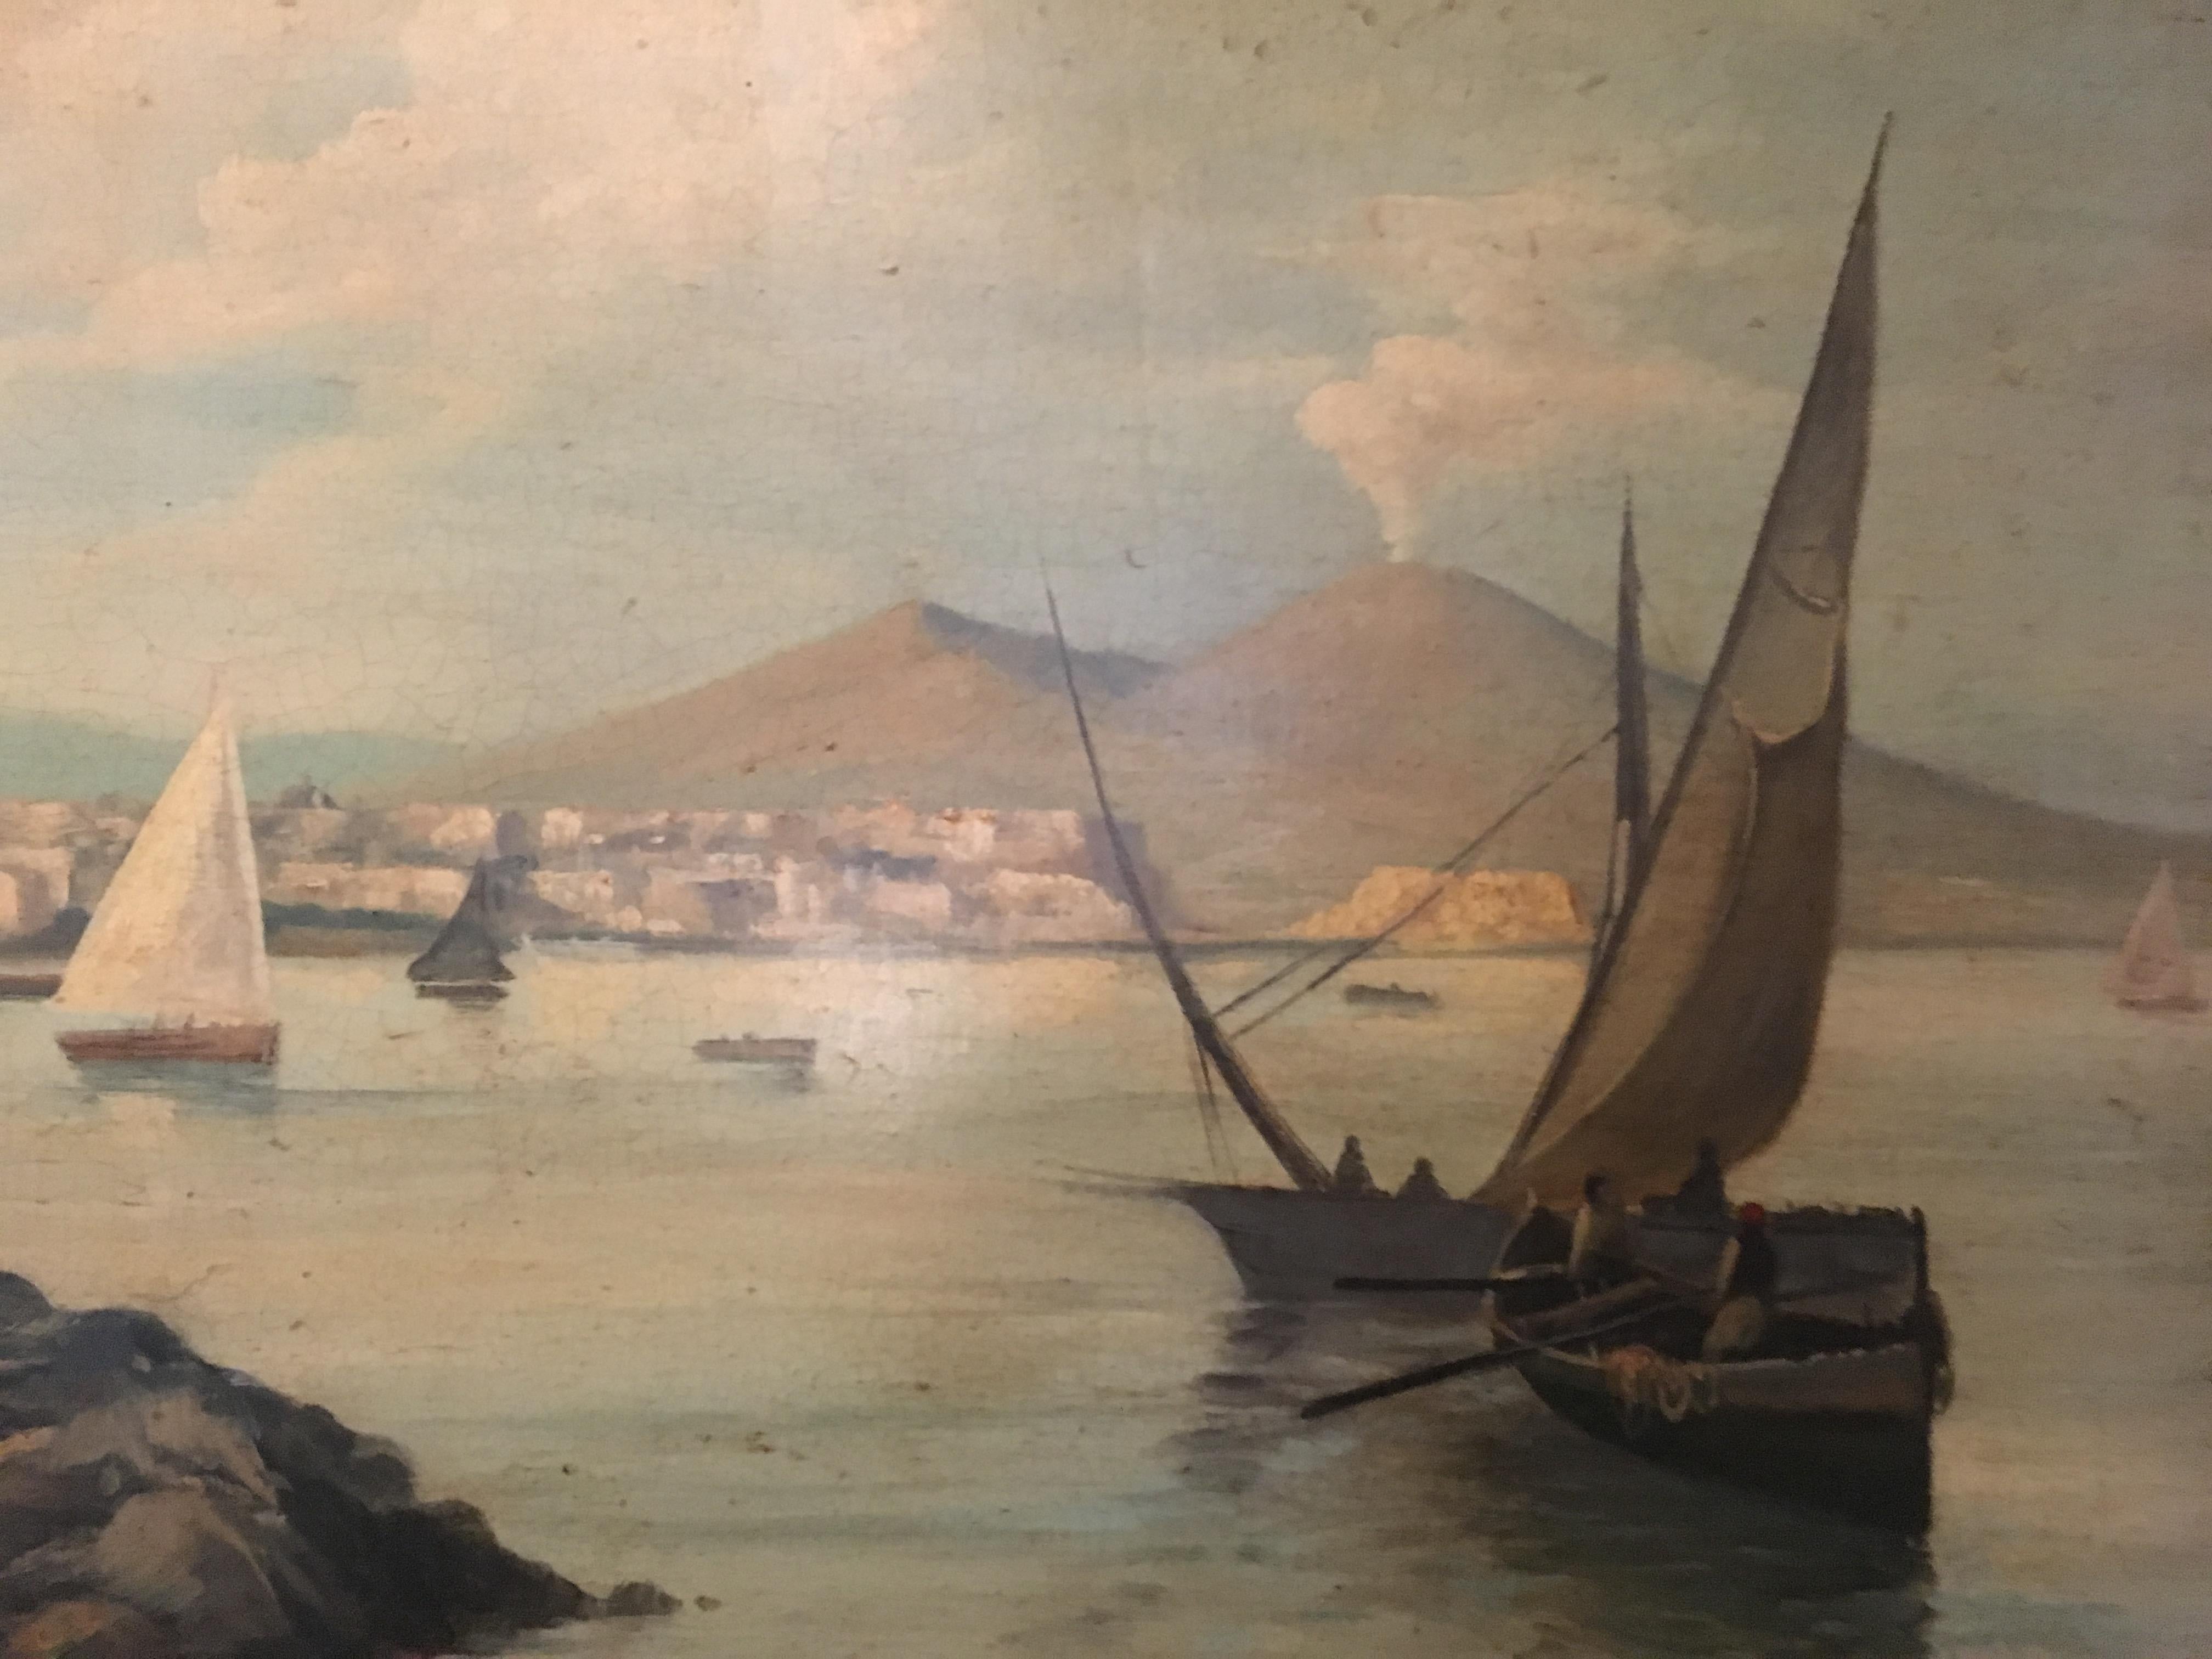 Naples - Ettore Ferrante - Italia - Oil on canvas cm. 60x90. Gold leaf gilded  wooden frame mis. est. 86x116.
Ettore Ferrante is a refined and excellent view painter of the past. As a critic of art, it is a real pleasure to talk about him.